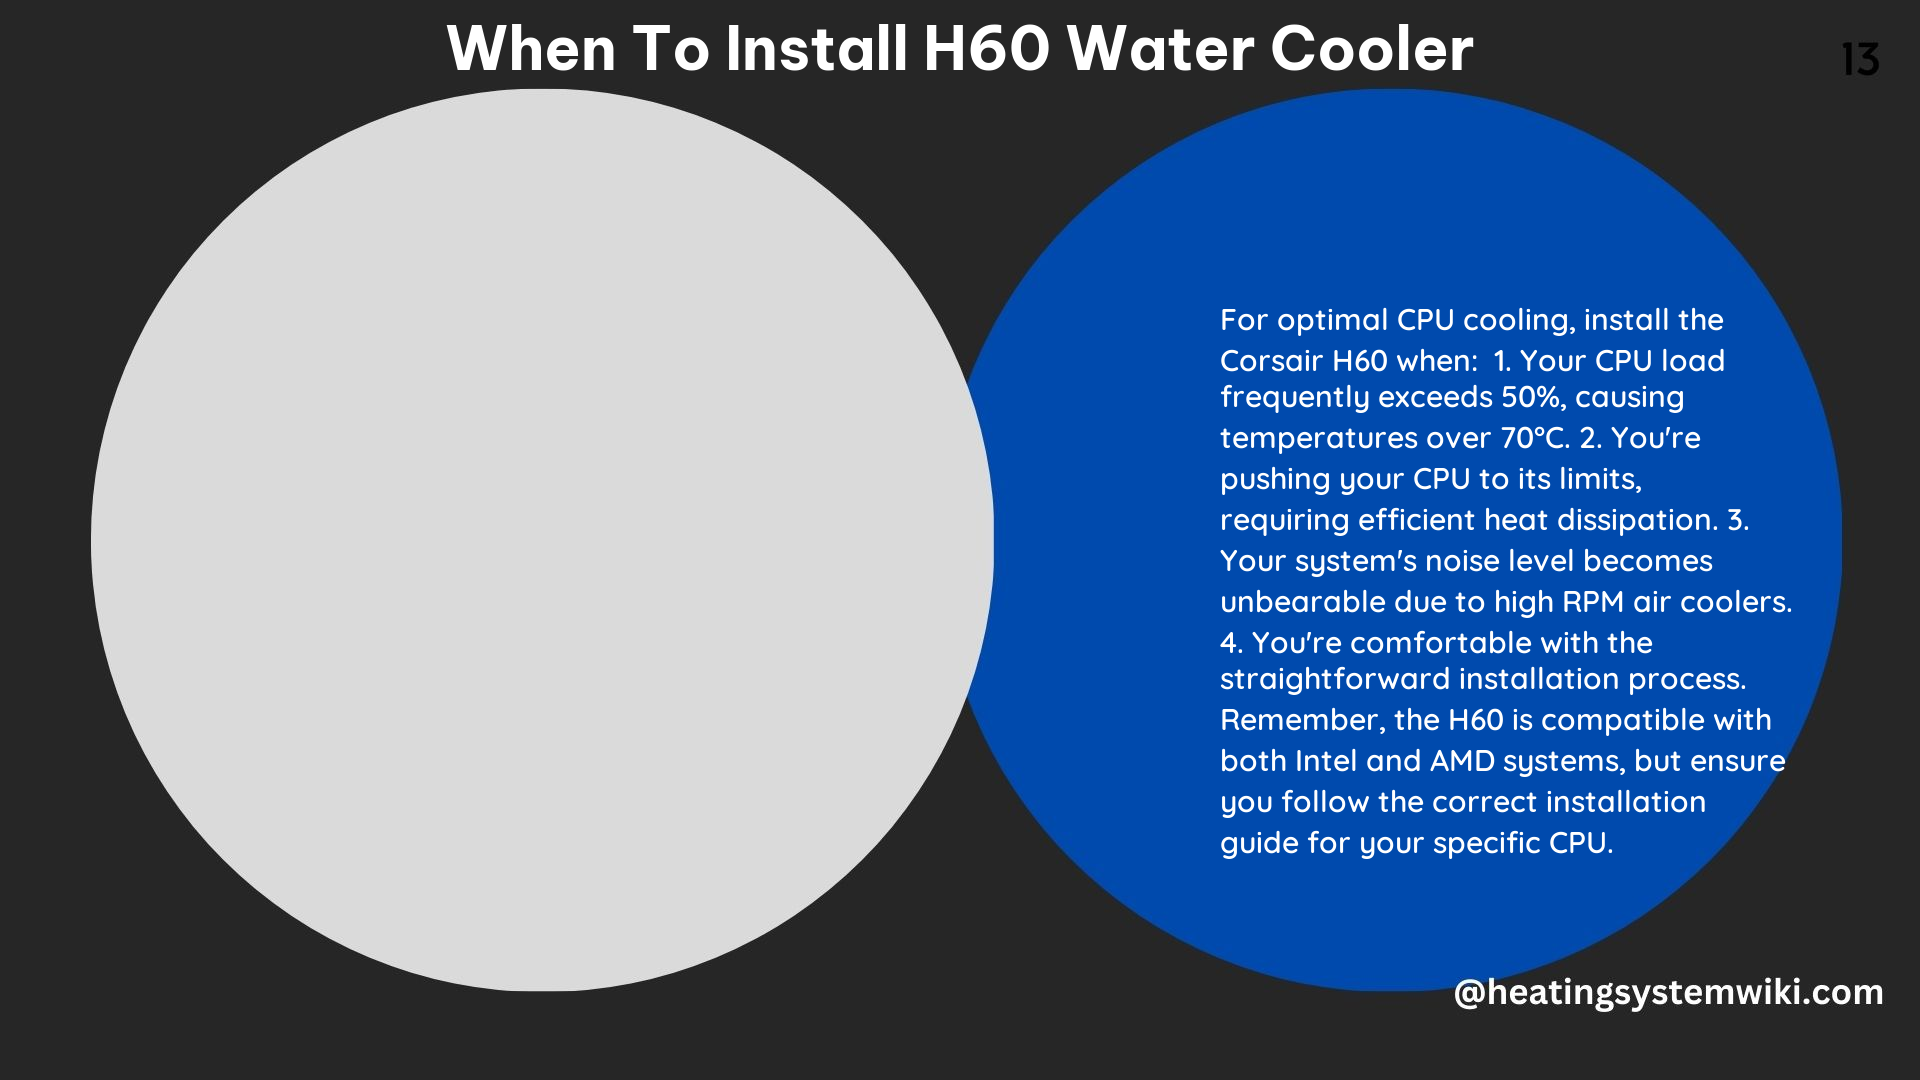 When to Install H60 Water Cooler